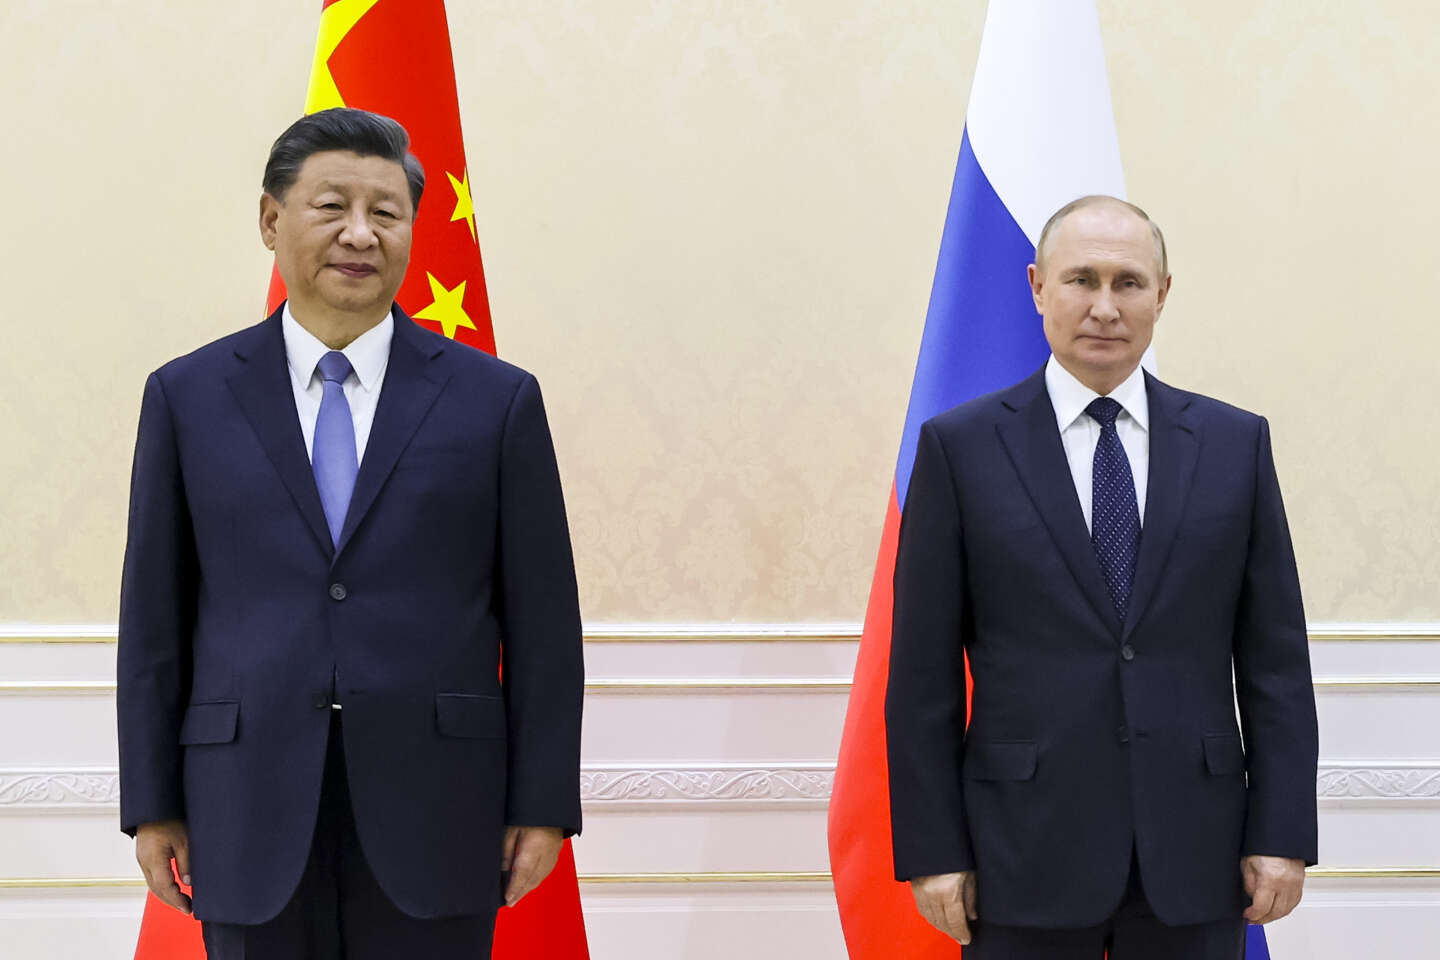 China is cautiously and enthusiastically supporting Russia’s economic recovery